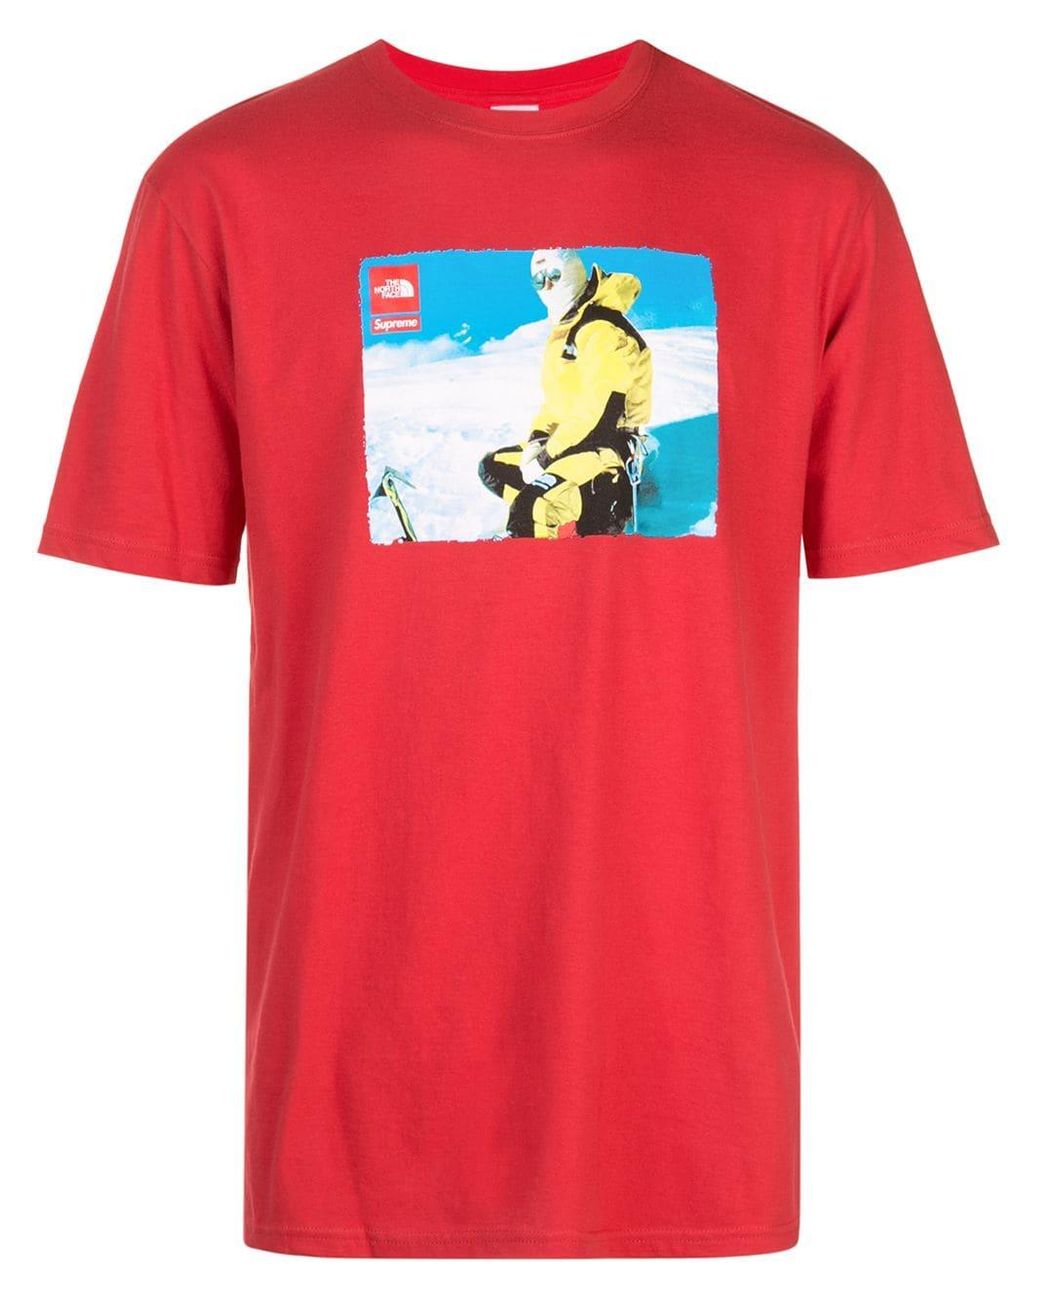 Supreme Cotton X The North Face Photo T-shirt in Red for Men - Lyst